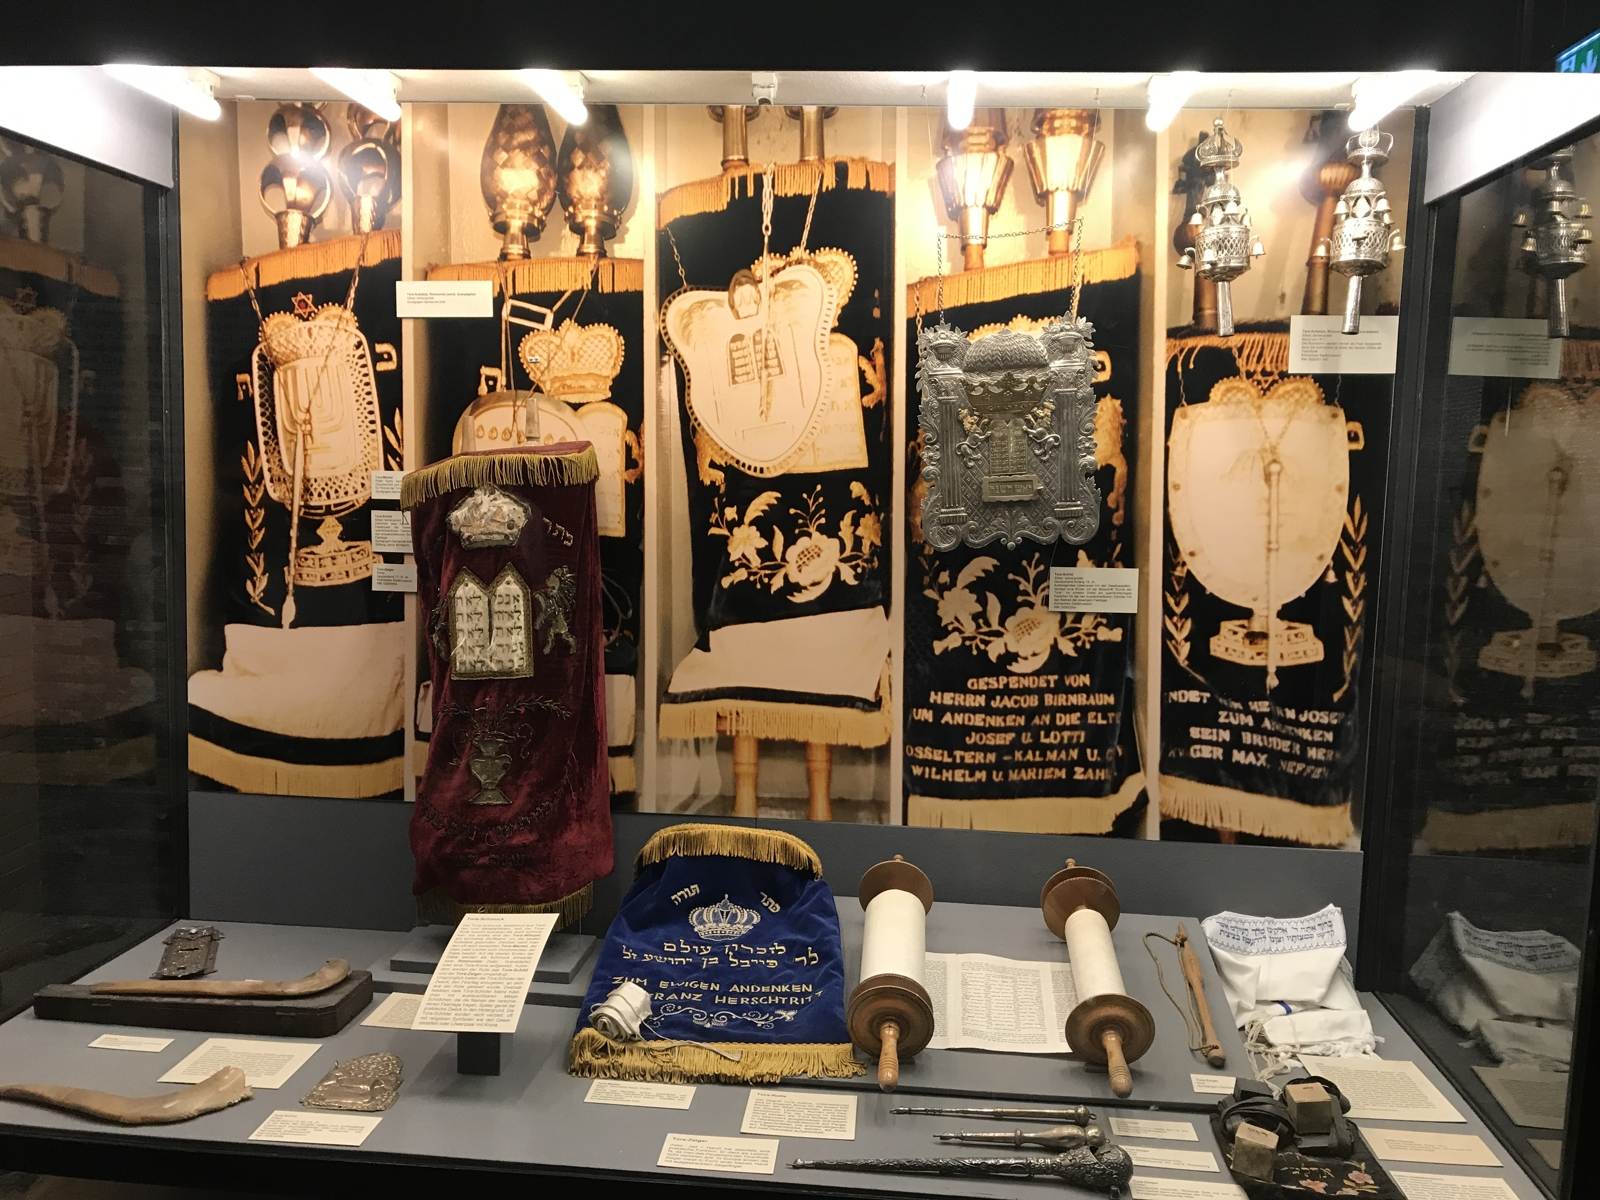 Exhibition in the synagogue in cologne